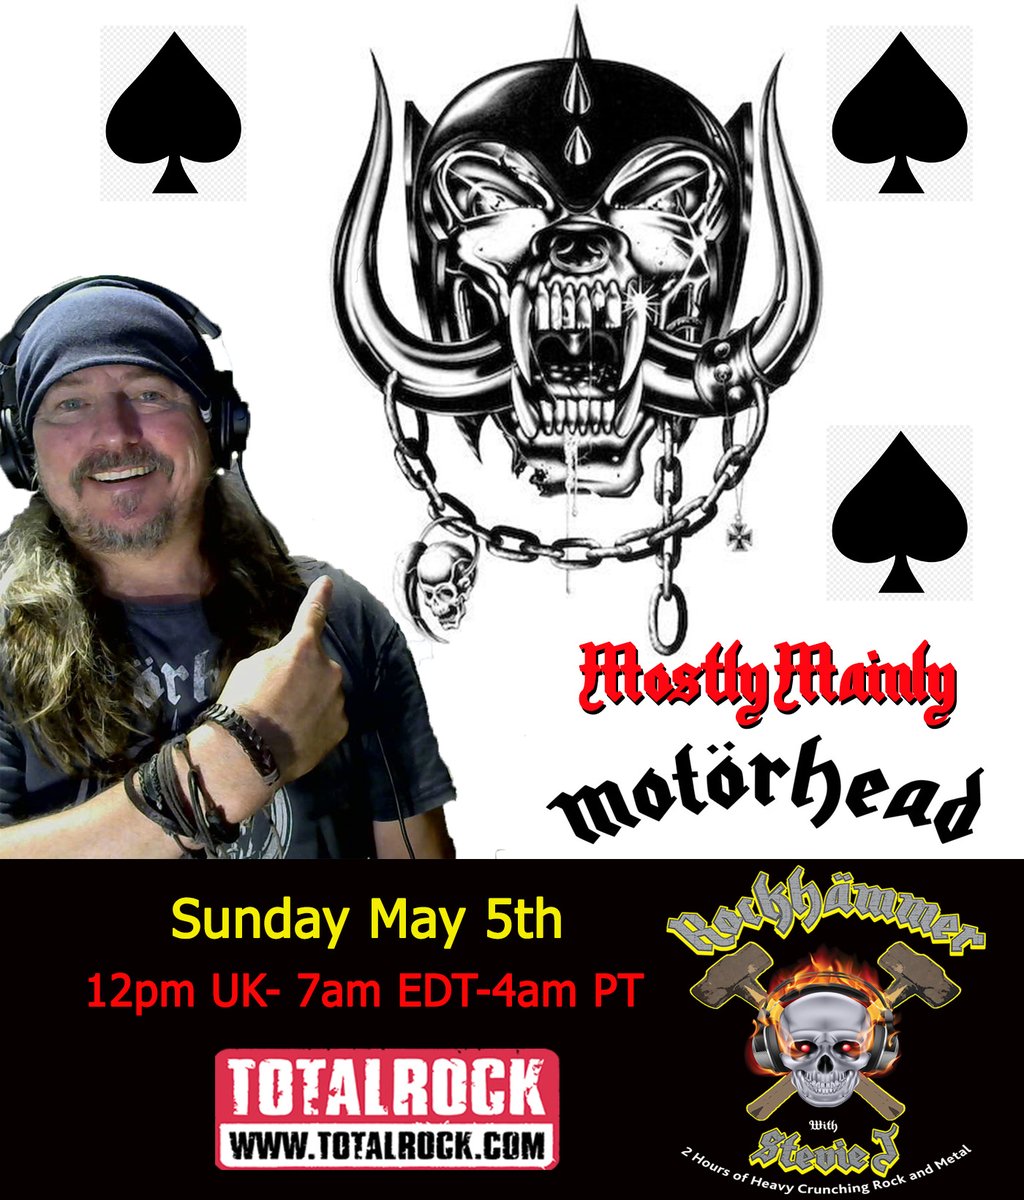 The 8th of May is on it's way, & you can catch me for 'Mostly, Mainly @myMotorhead ' on @TotalRockOnline As well as all thing's Motorhead, I'll be connecting tracks from @PCATBS @OrangeGoblin1 @HighonFireBand @Metallica @Nitrogods @HawkwindHQ & many more! Keep Sunday #Louder ♠️